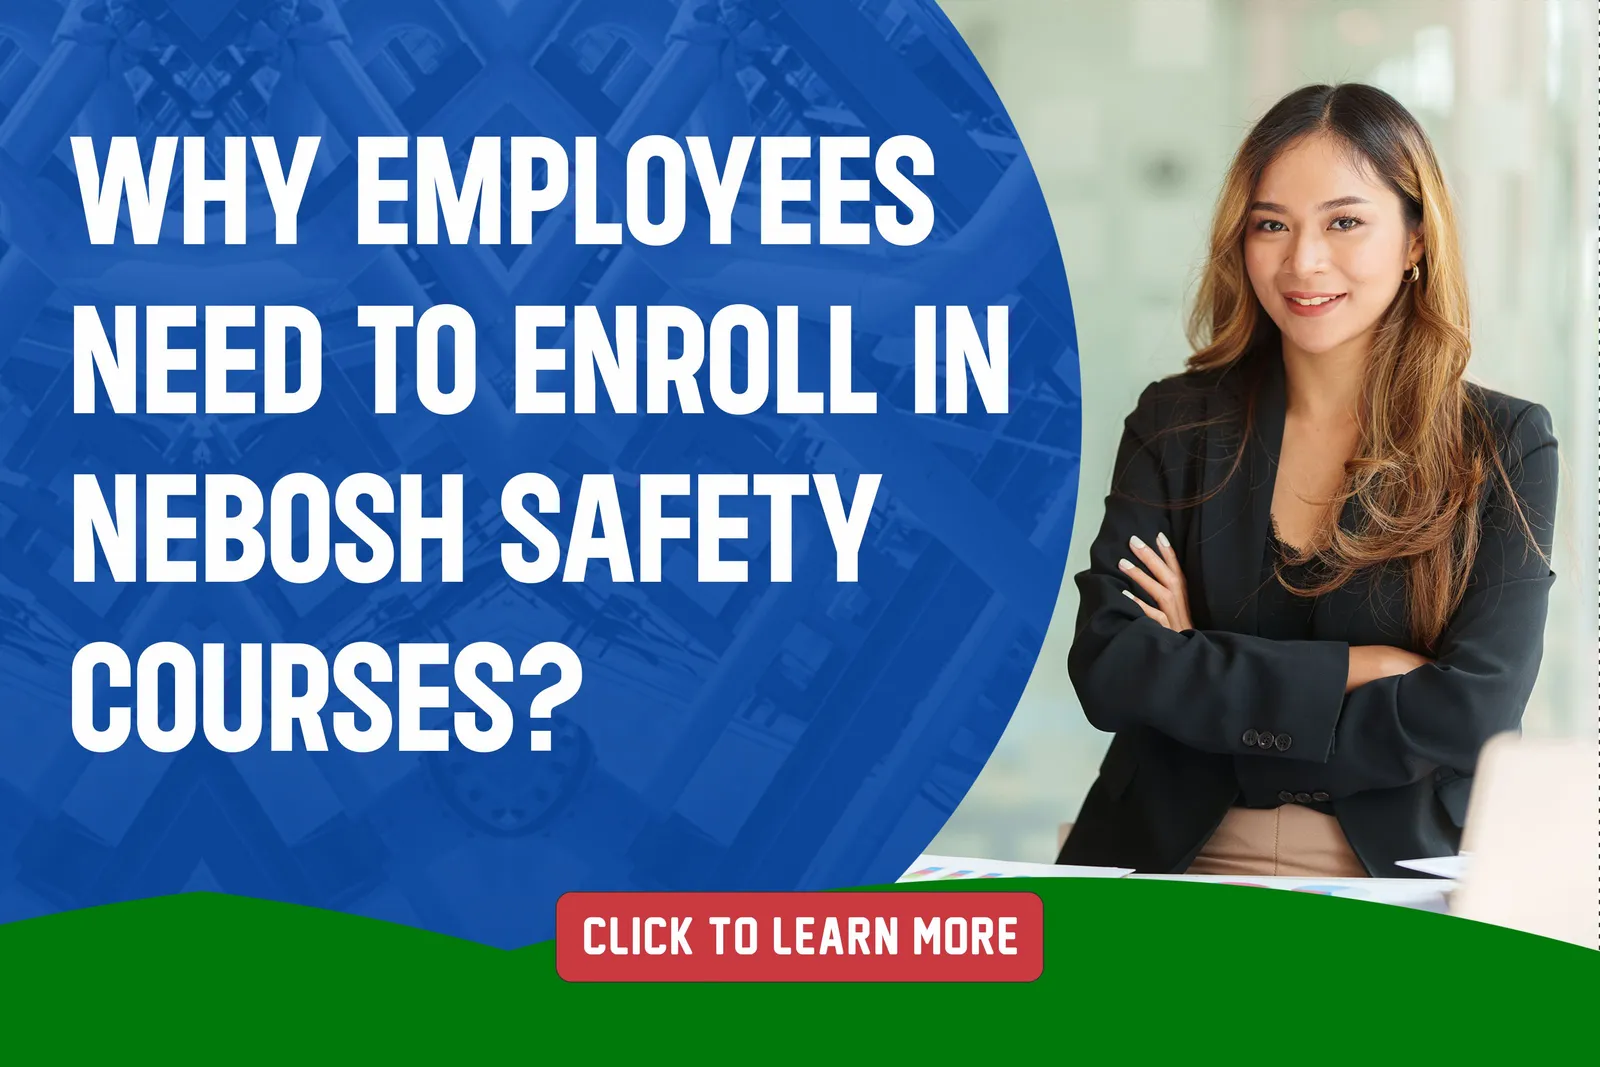 Why Employees Need To Enroll In NEBOSH Safety Courses